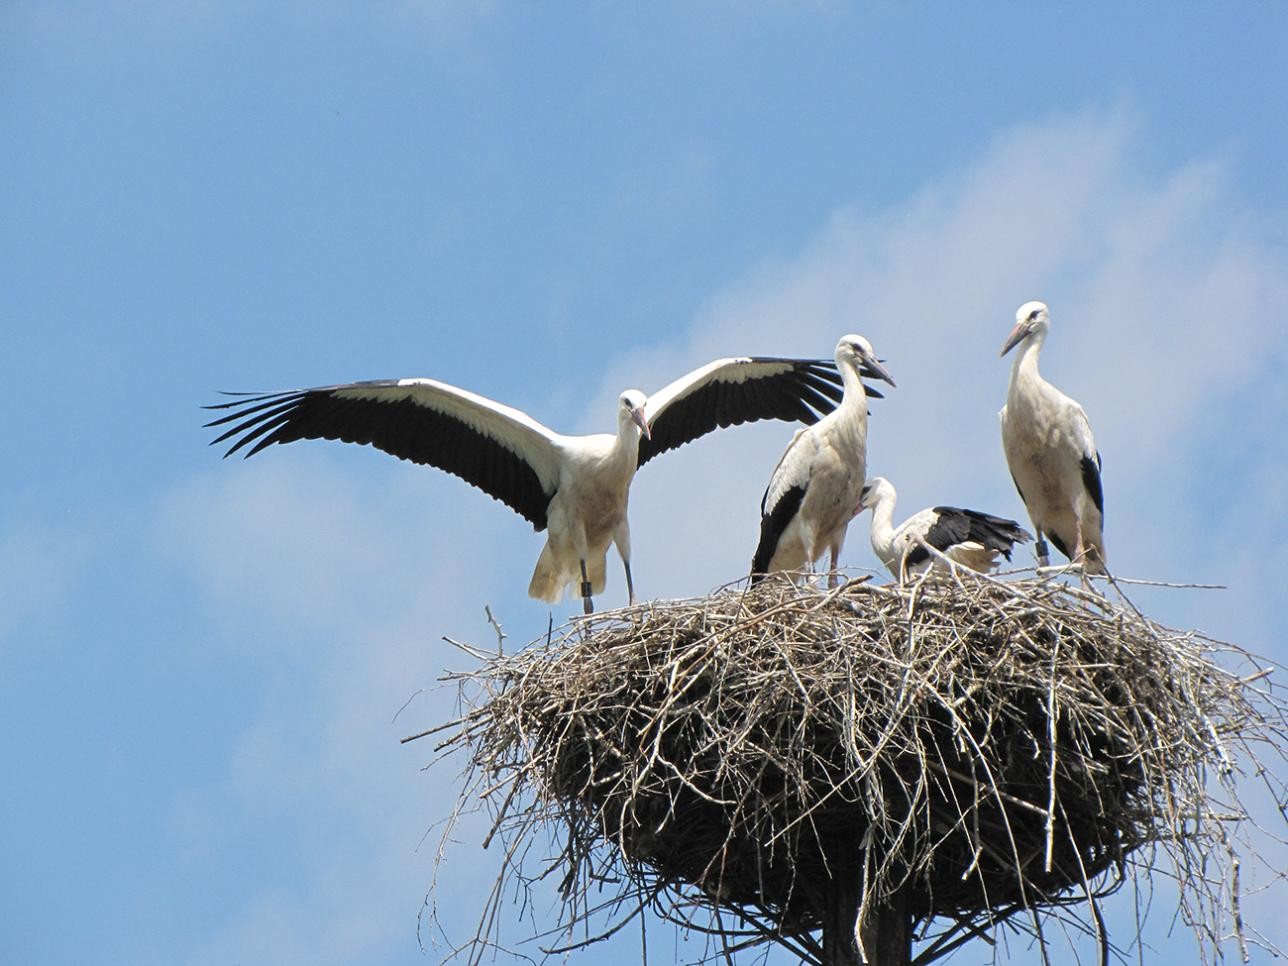 A family of storks in their newst